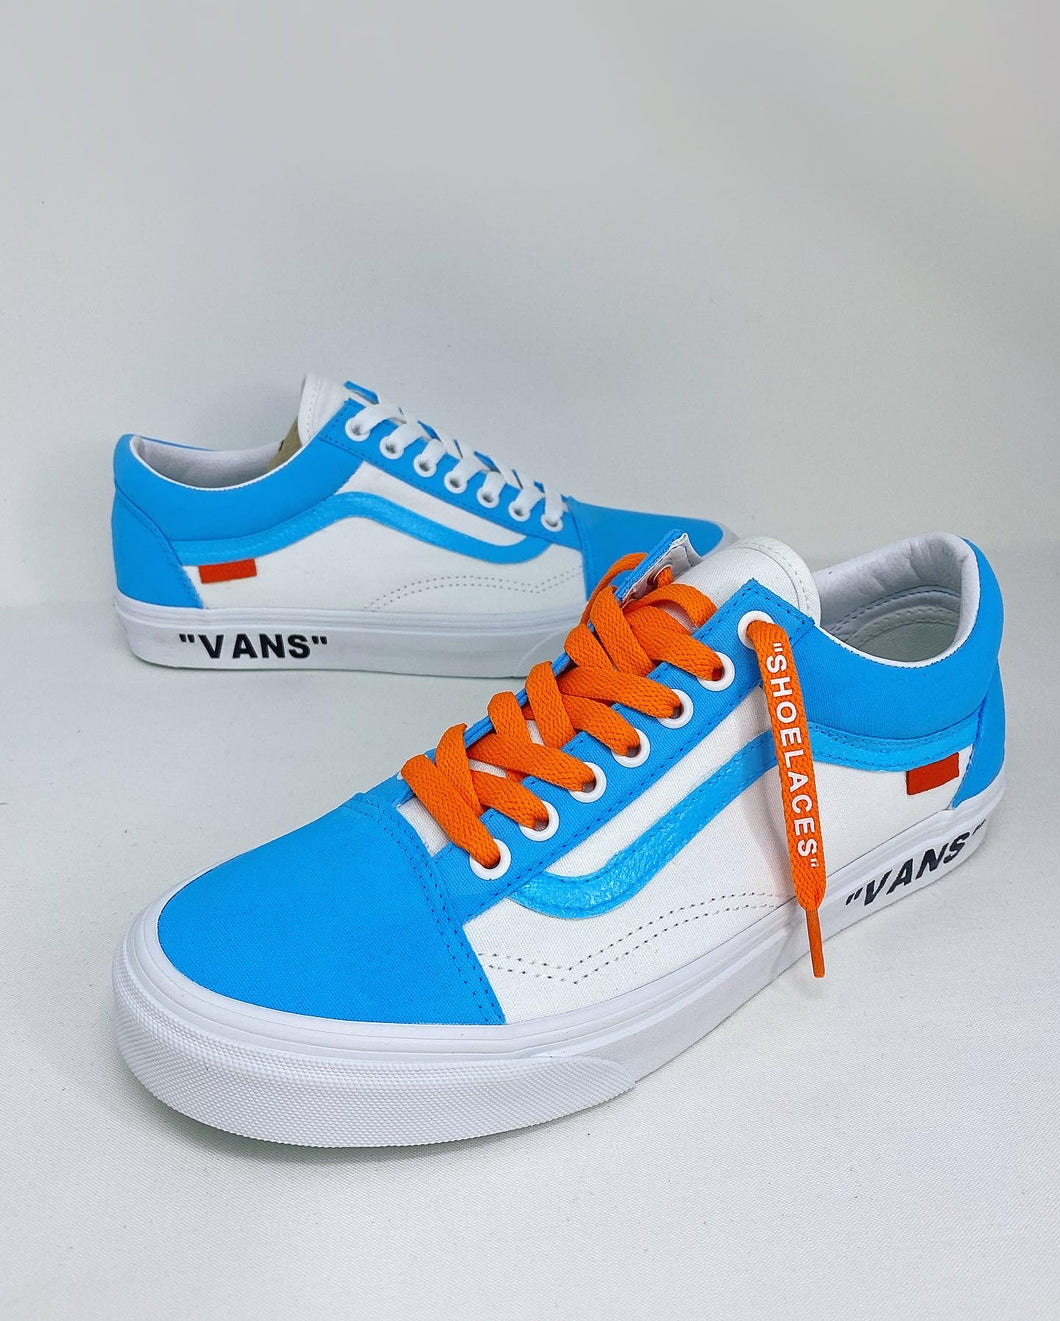 vans powered by shopify